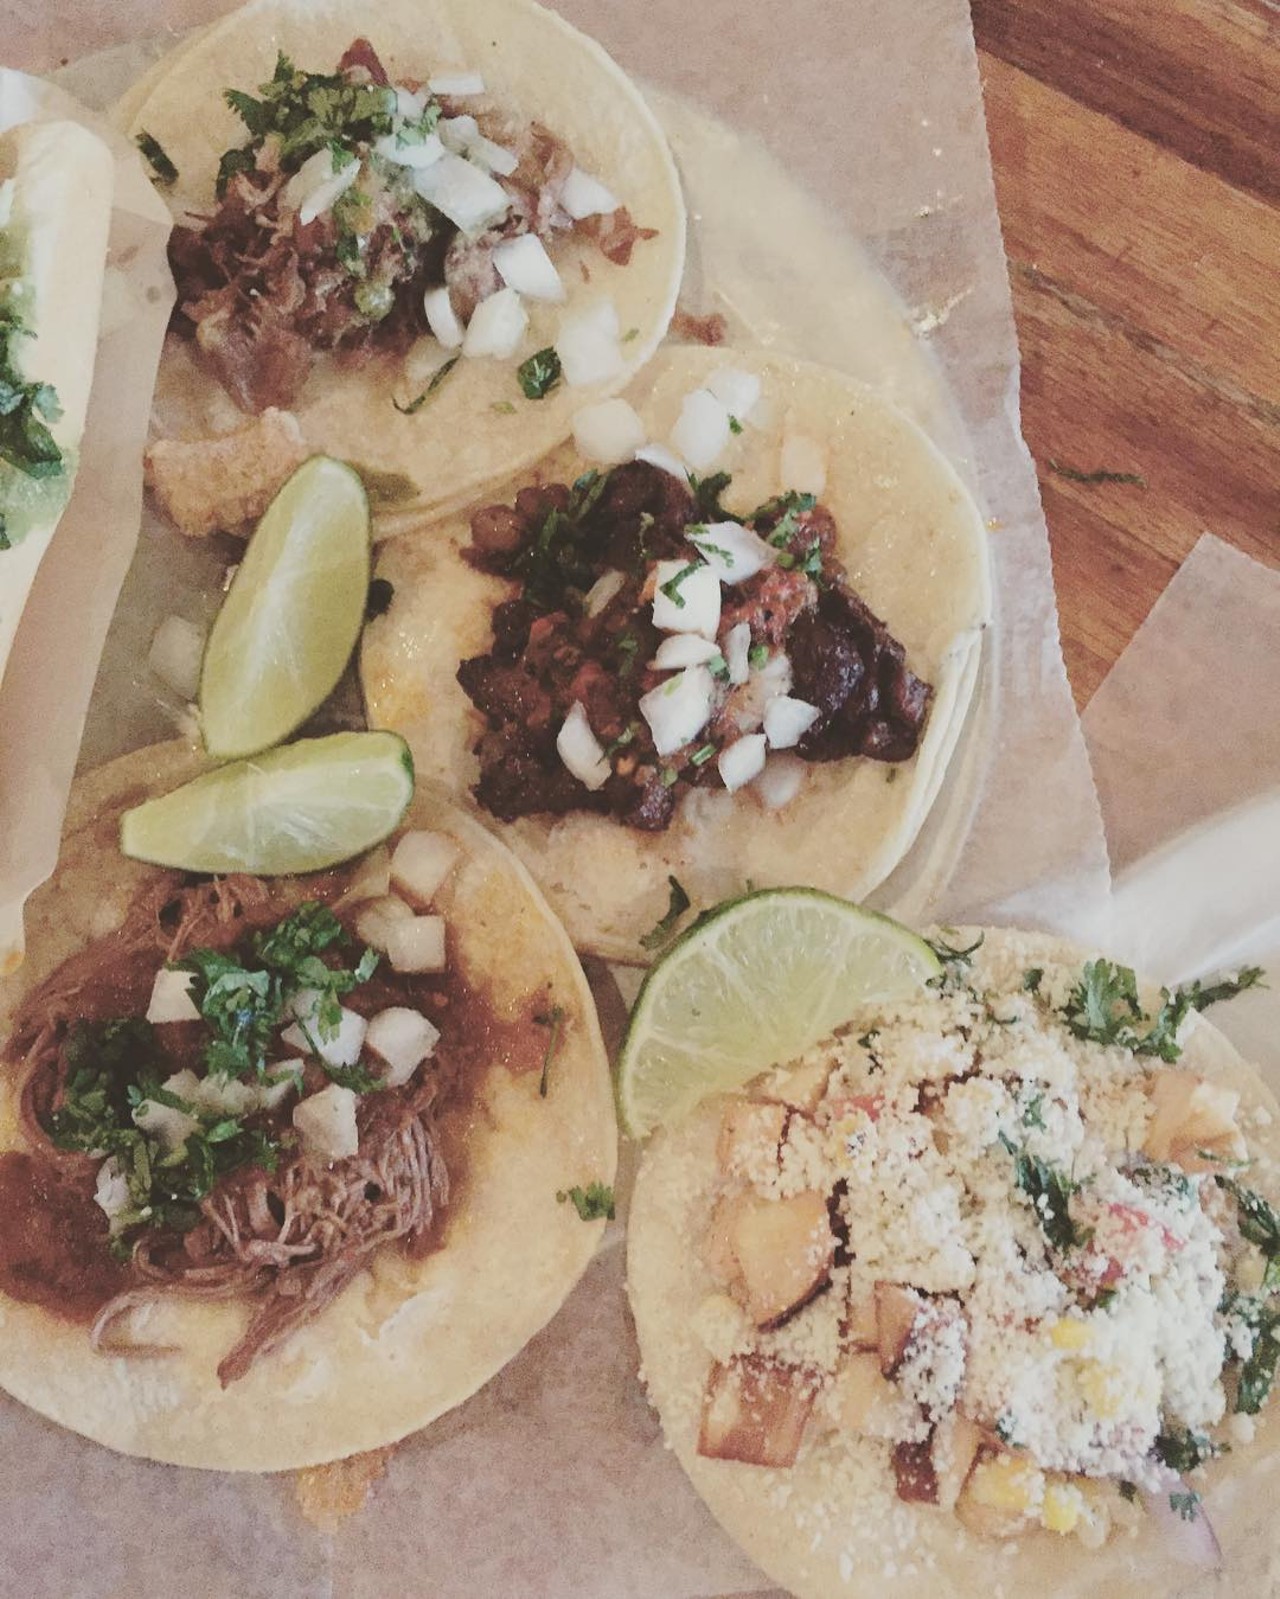 Imperial 
Ferndale | 22828 Woodward Ave. | (248) 850-8060 
Tacos, off all varieties, always on point. Rotating list of veggie and special options, and a few stand bys like Carne Asada and Pastor. (Photo: andapanda7701, via Instagram)